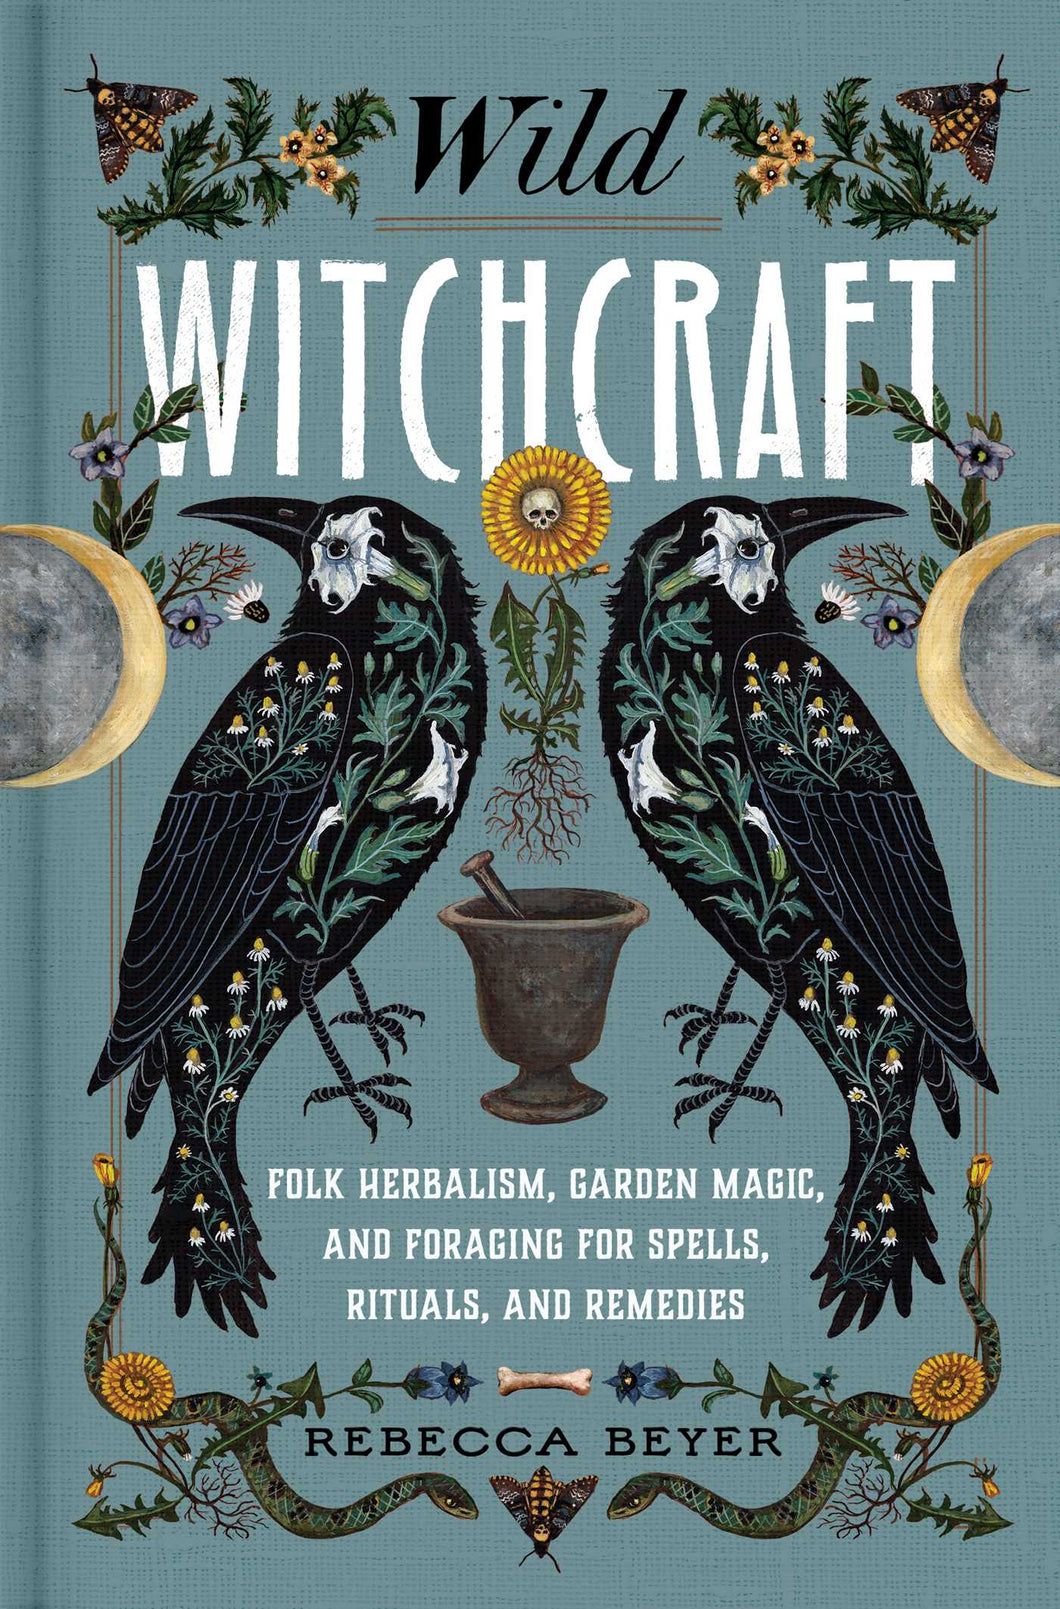 Wild Witchcraft: Folk Herbalism, Garden Magic, and Foraging for Spells, Rituals, and Remedies by Rebecca Beyer